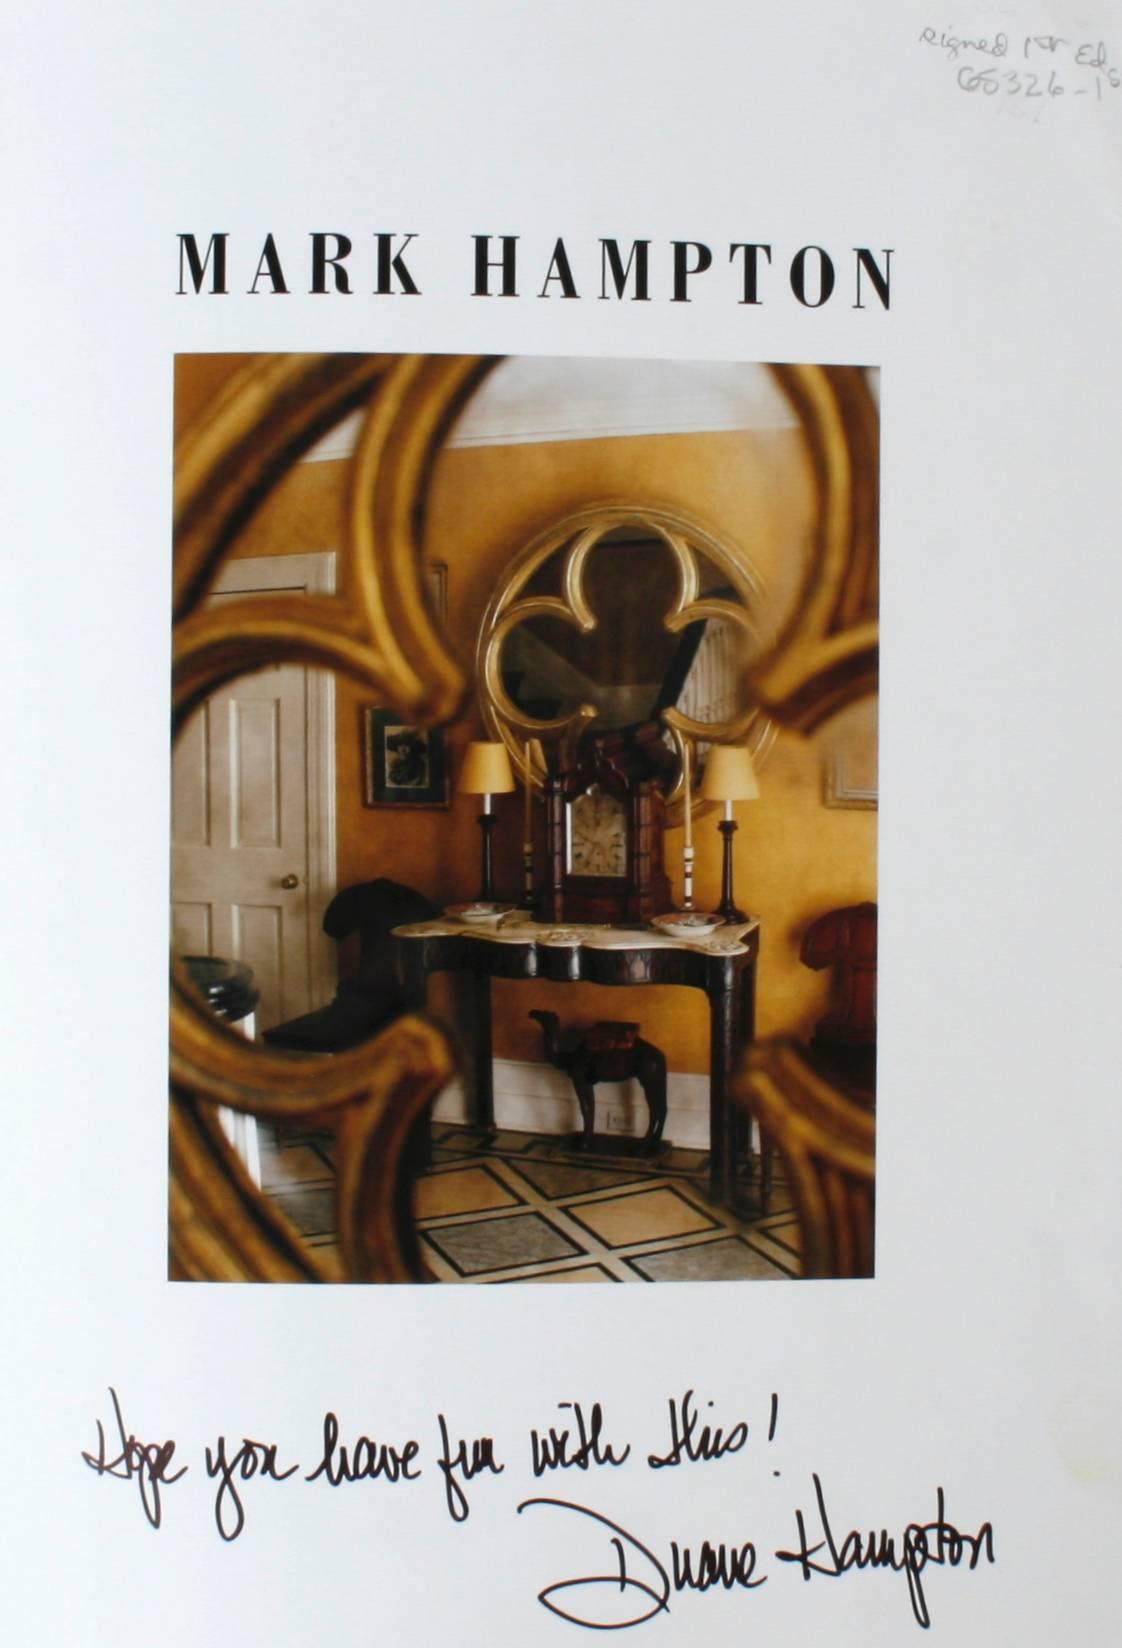 Mark Hampton : An American Decorator by Duane Hampton. Rizzoli Pub., US, 2010. Signed and inscribed 1st Ed hardcover with dust jacket. Inscribed, 